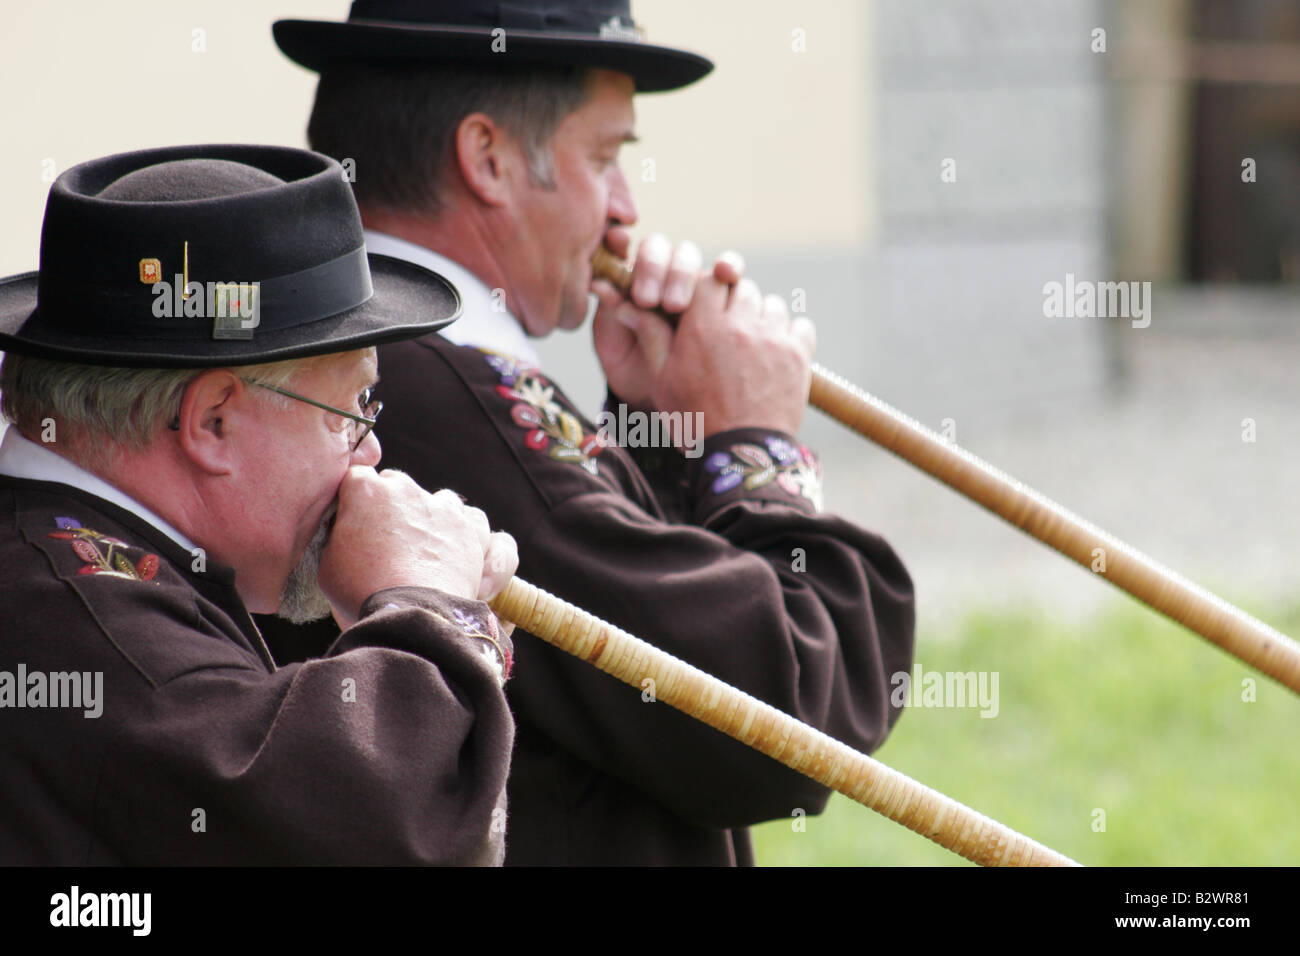 Alphorn players in traditional costume during Jodlerfest in Malters, near Lucerne, Central Switzerland Stock Photo